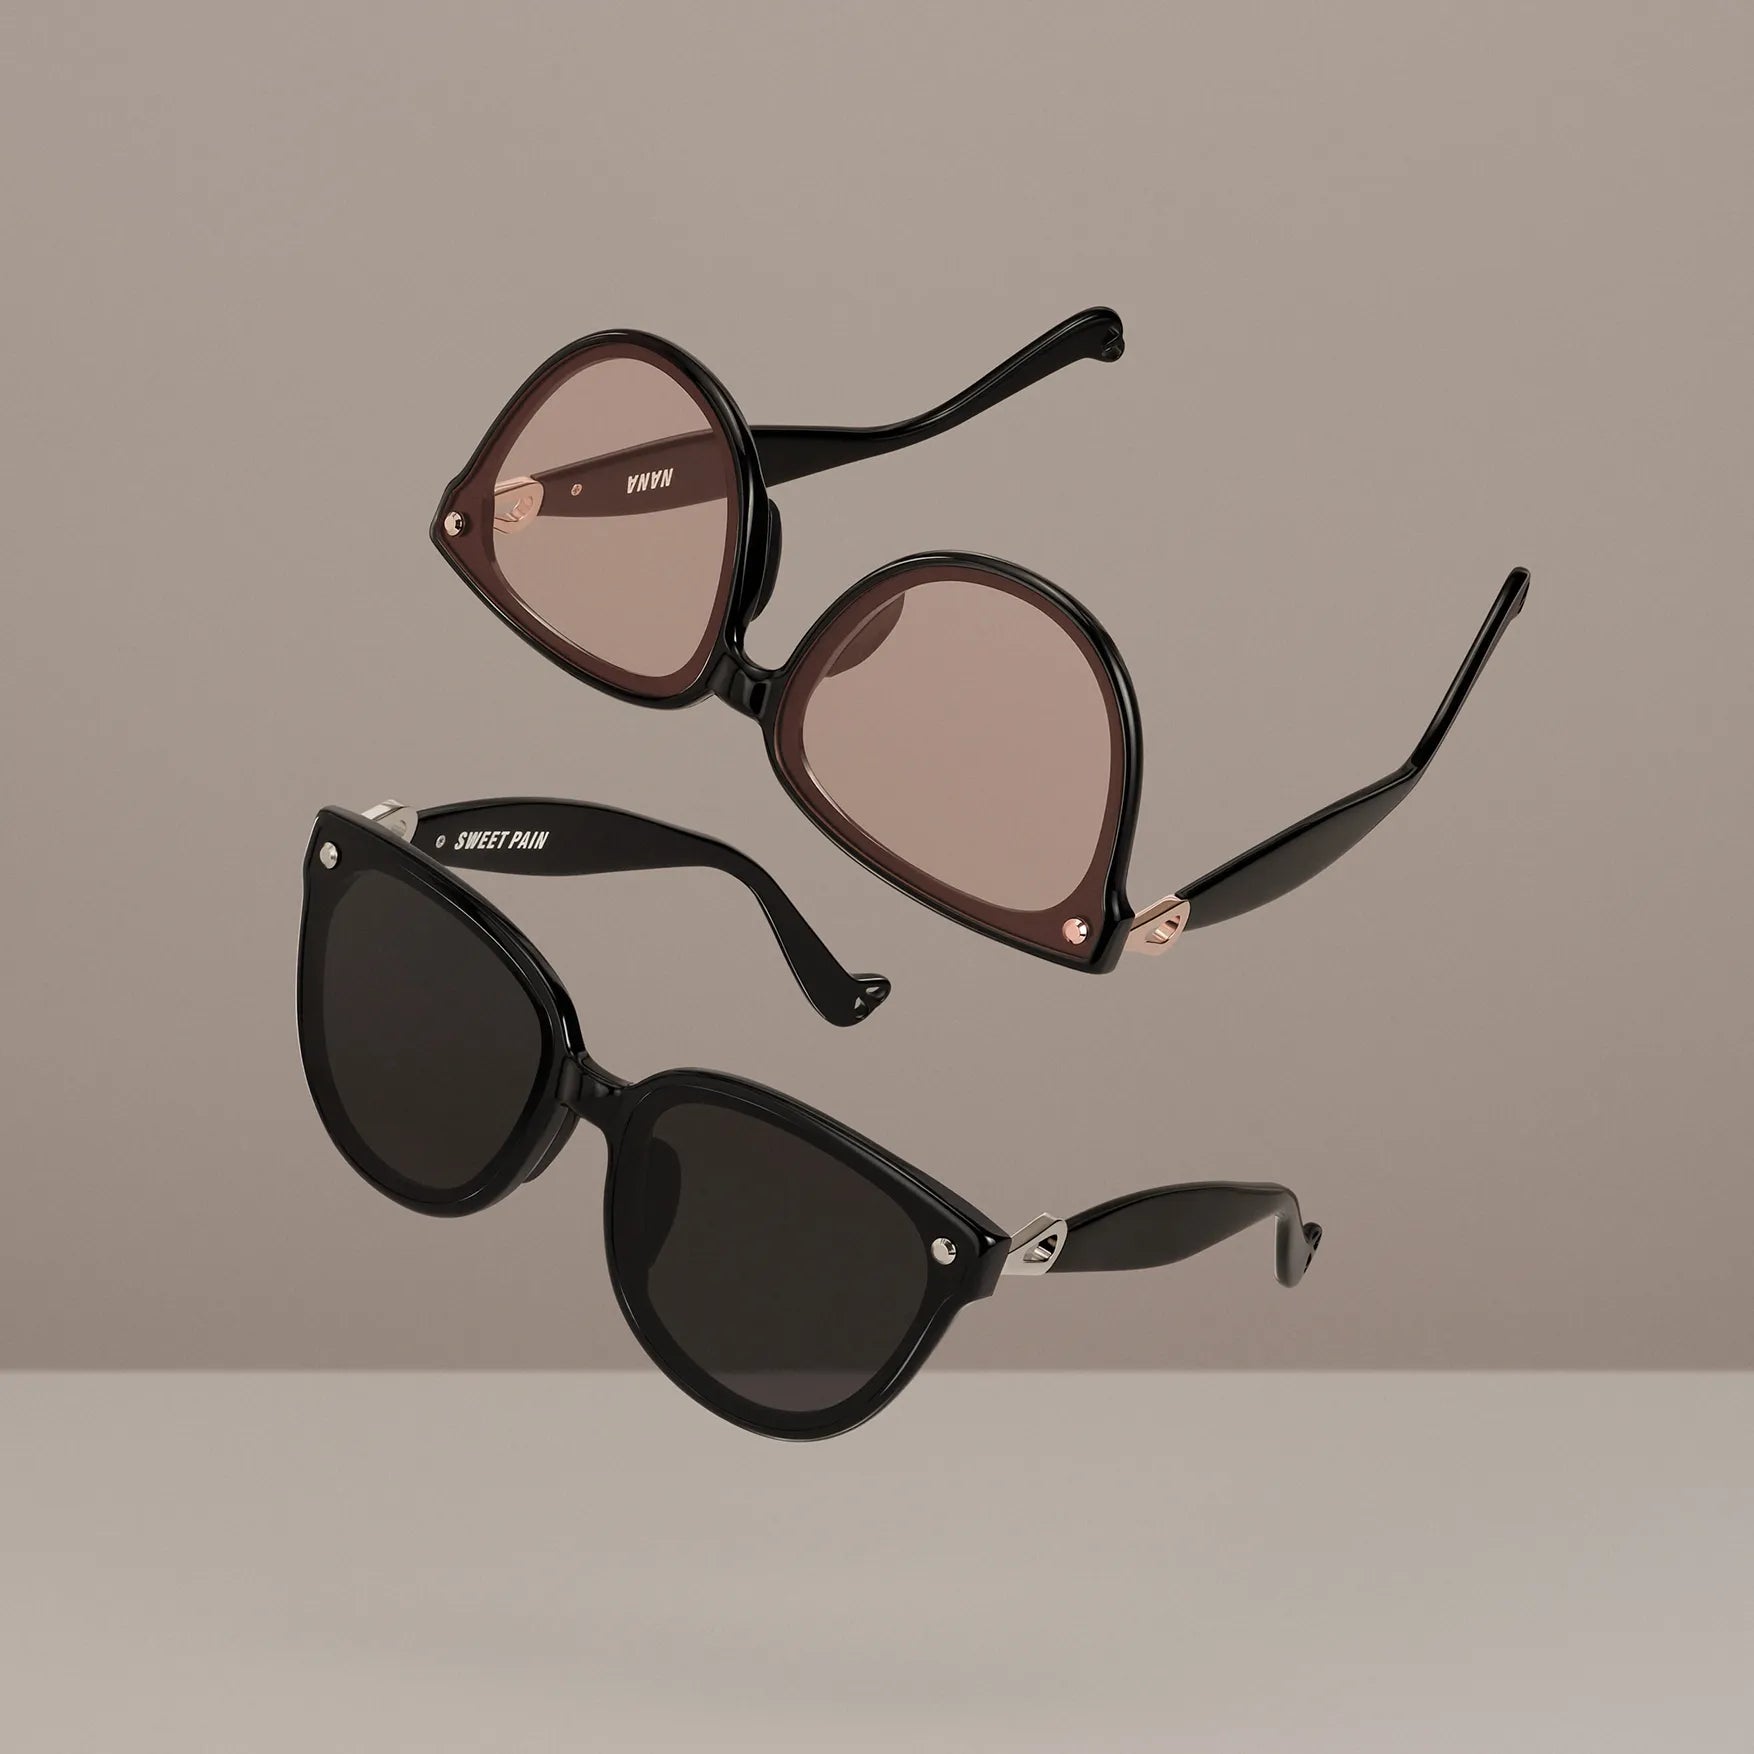 Sweet Pain's Empowerment – A captivating image showcasing two distinct pairs of Sweet Pain sunglasses, highlighting the brand's dedication to empowering every woman by providing stylish, comfortable, and uniquely designed eyewear.